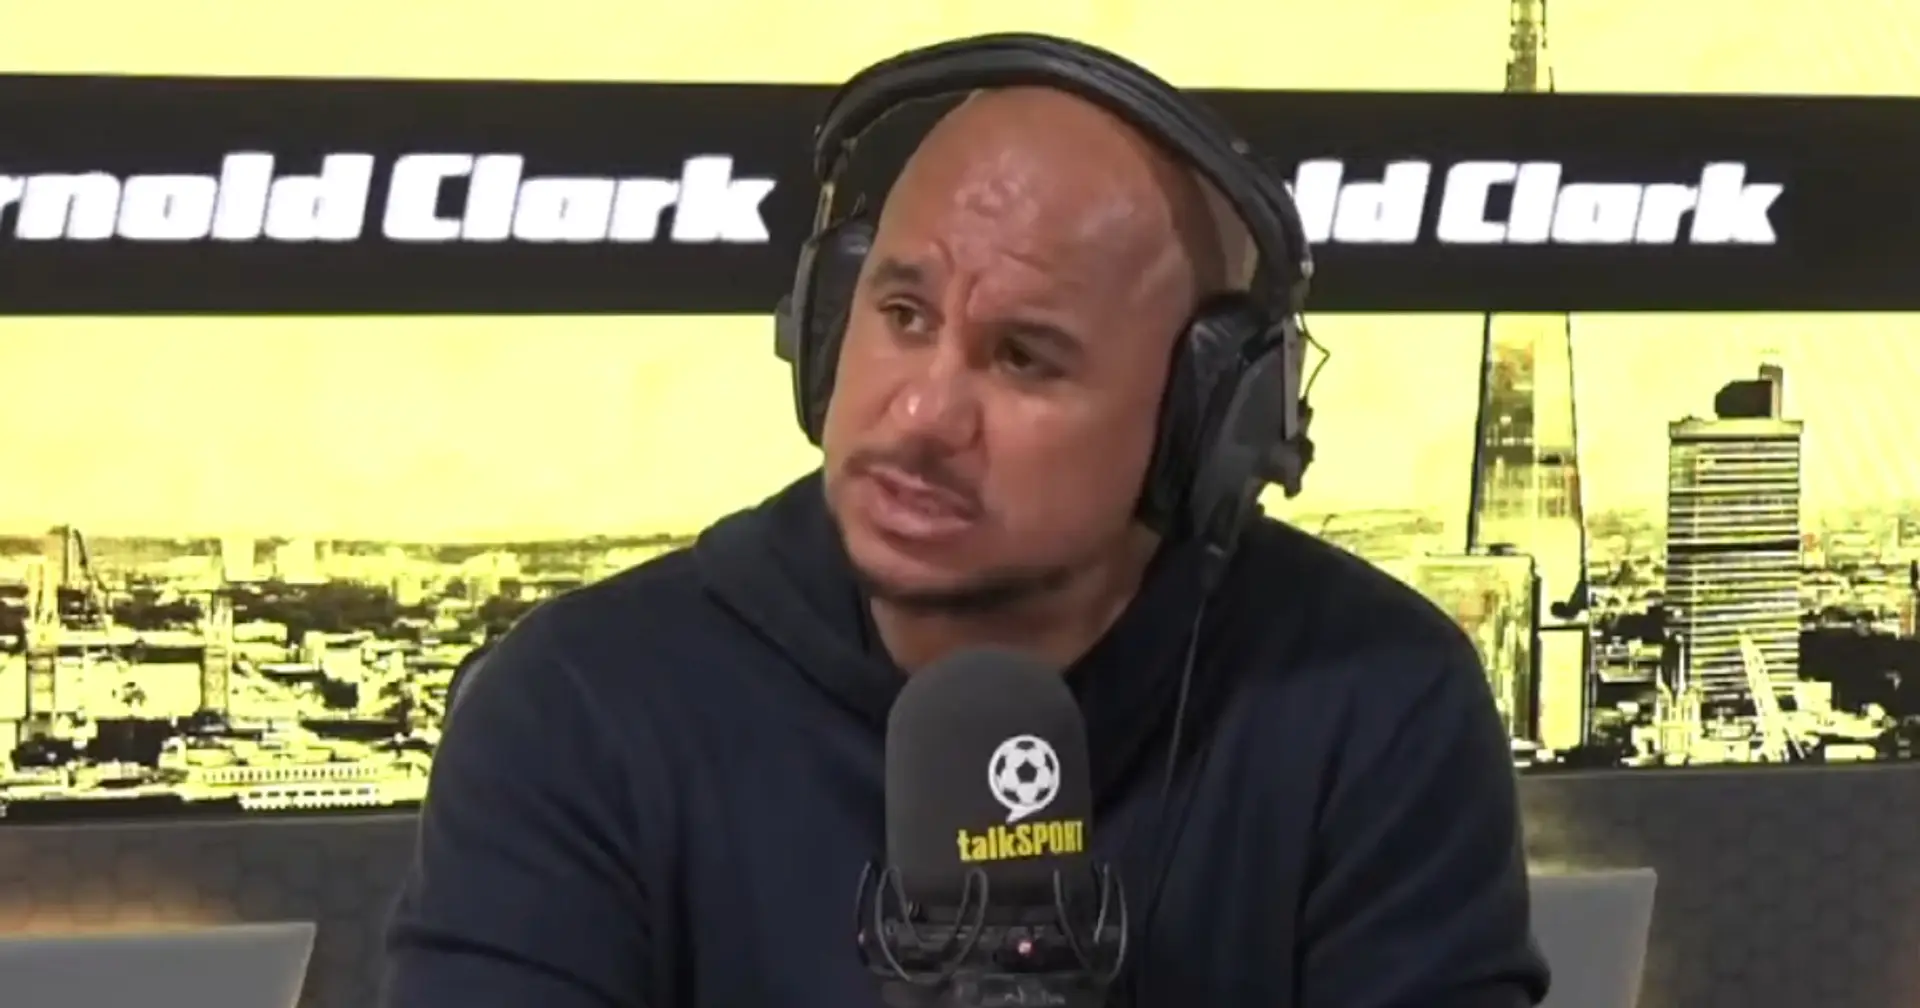 'End-to-end, two teams that want to play attacking football': Gabriel Agbonlahor makes Spurs clash prediction